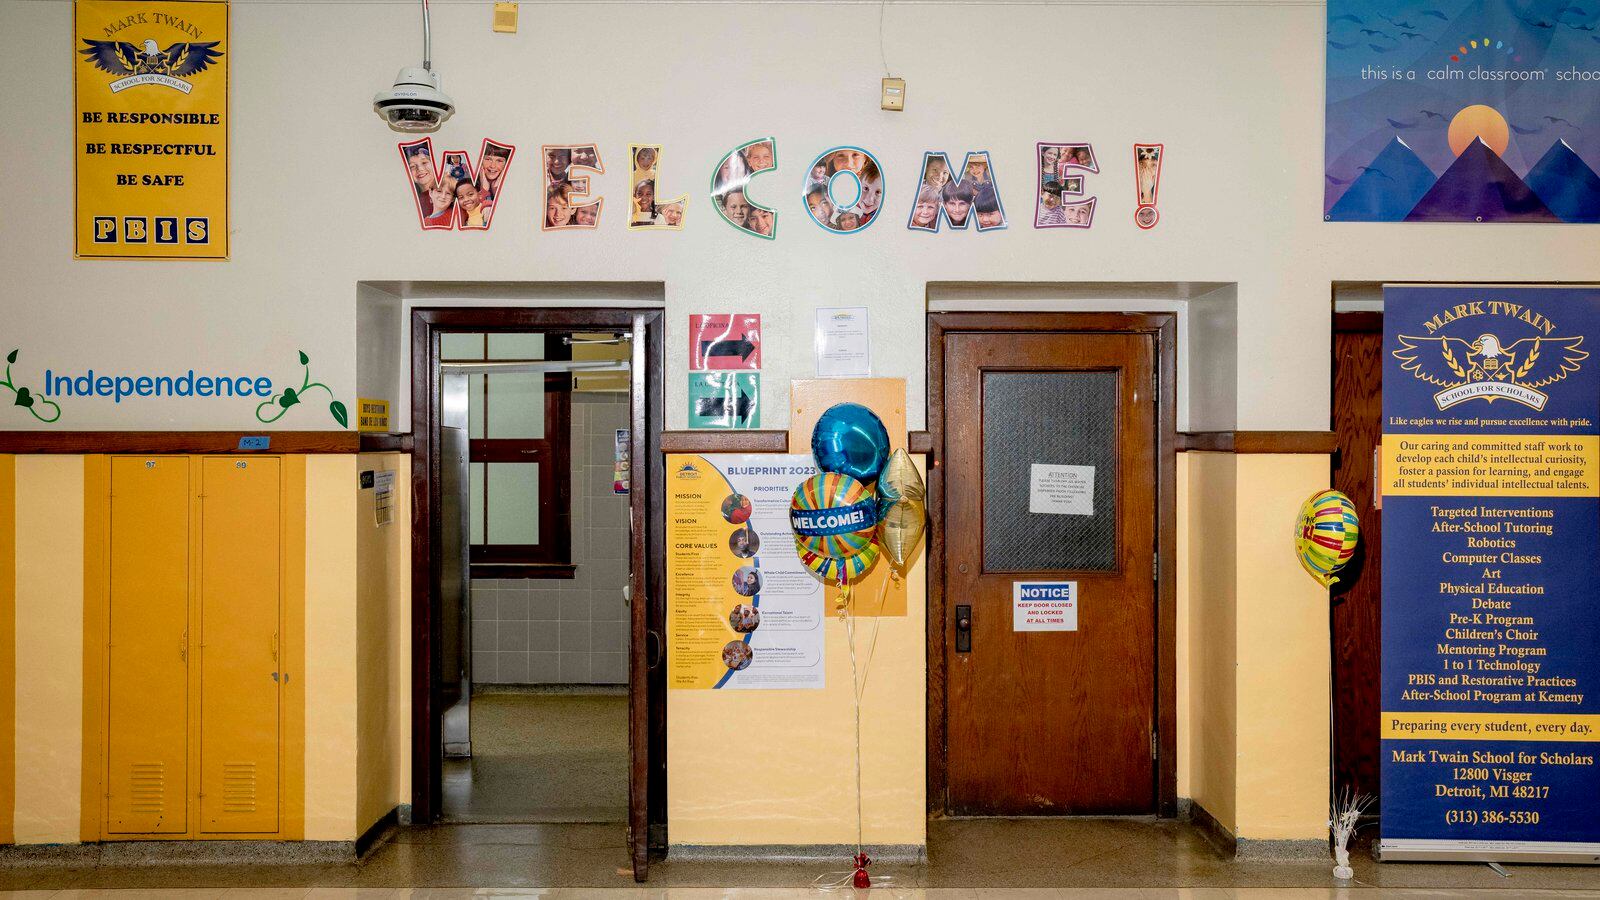 A school hallway with a welcome sign hanging up on the wall